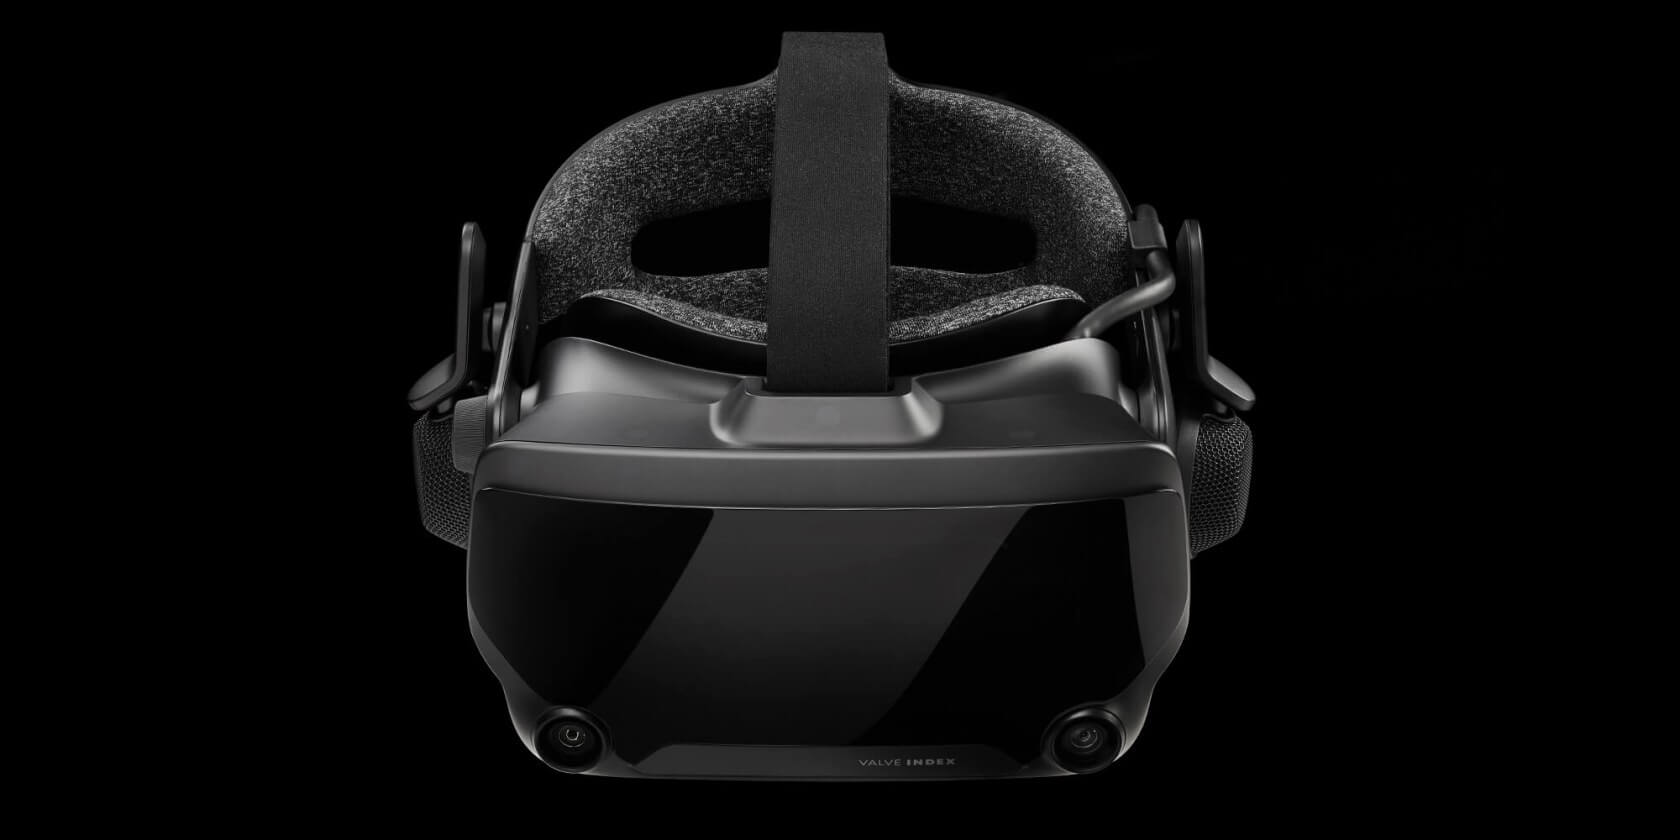 Valve reveals its 'Index' VR headset, featuring finger-tracking controllers, a 120Hz display, and more